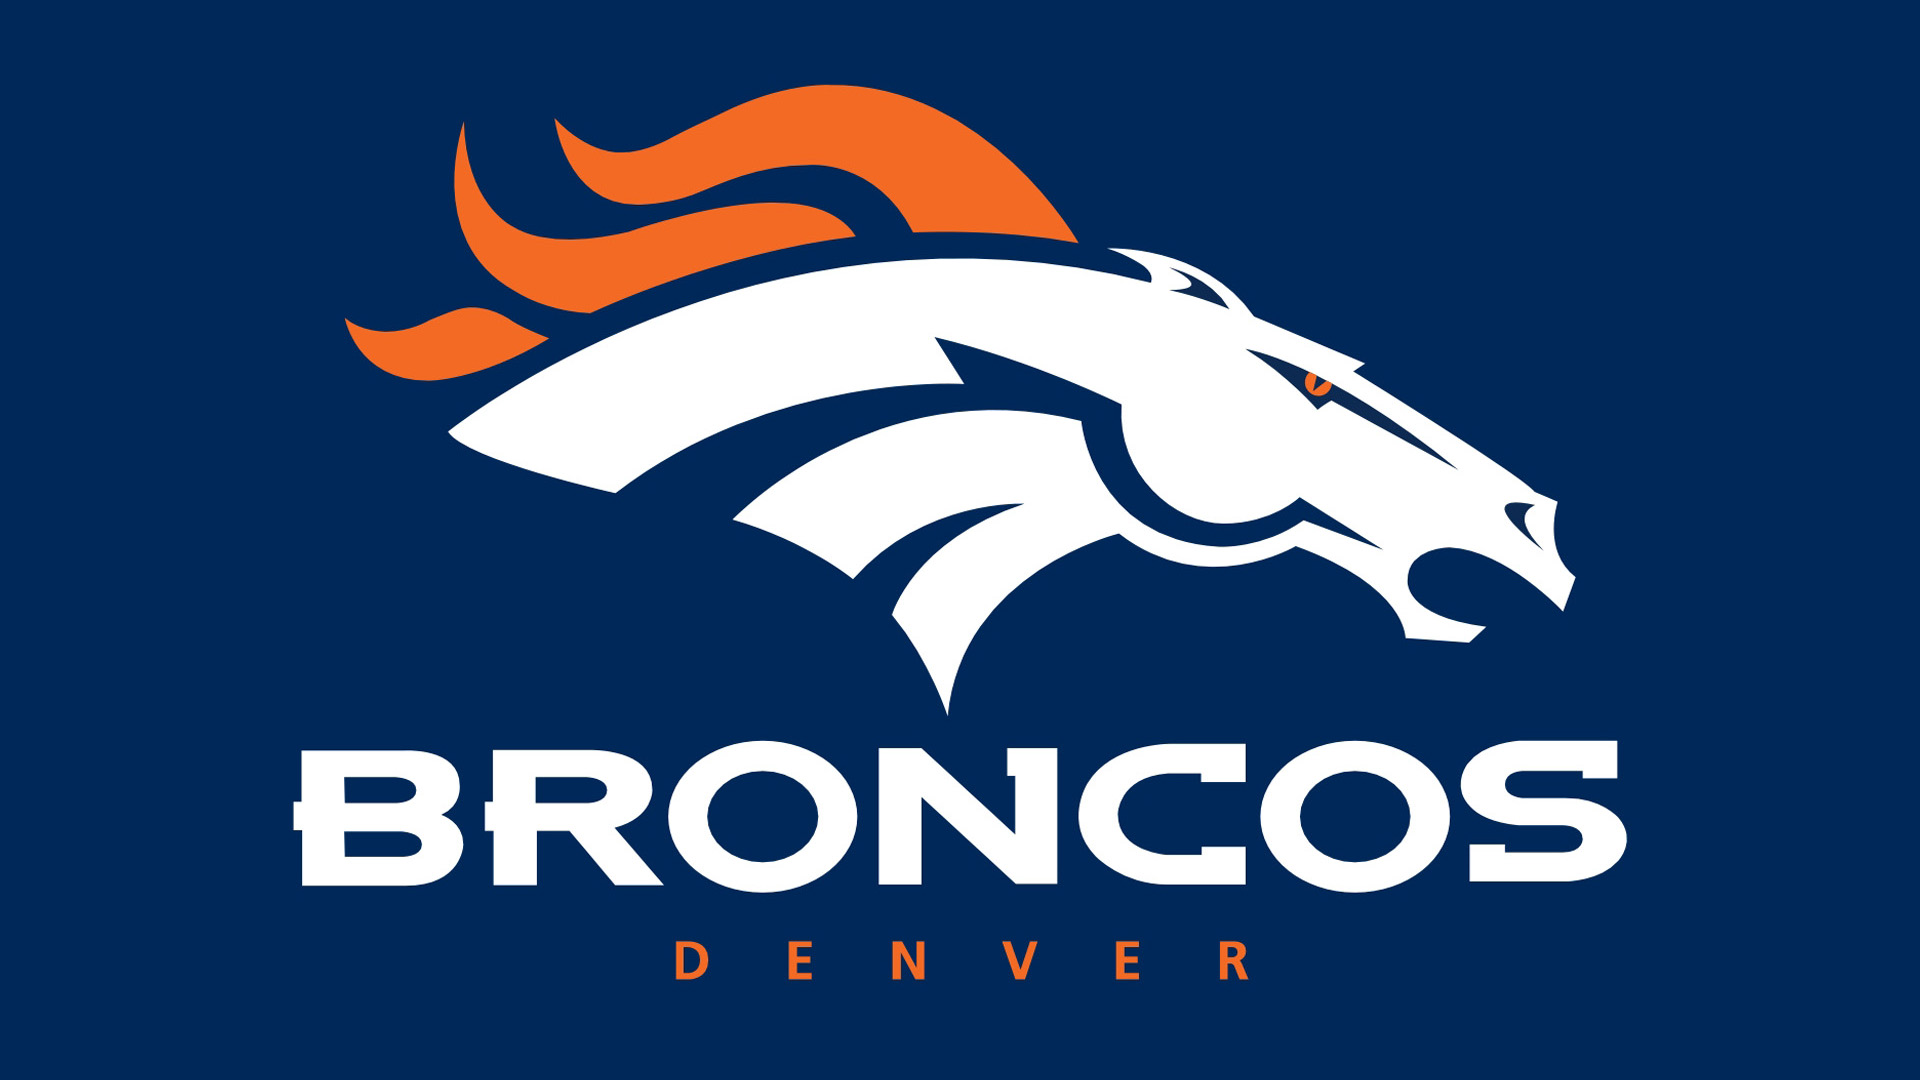 You Like Denver Broncos Wallpaper Surely Ll Love This